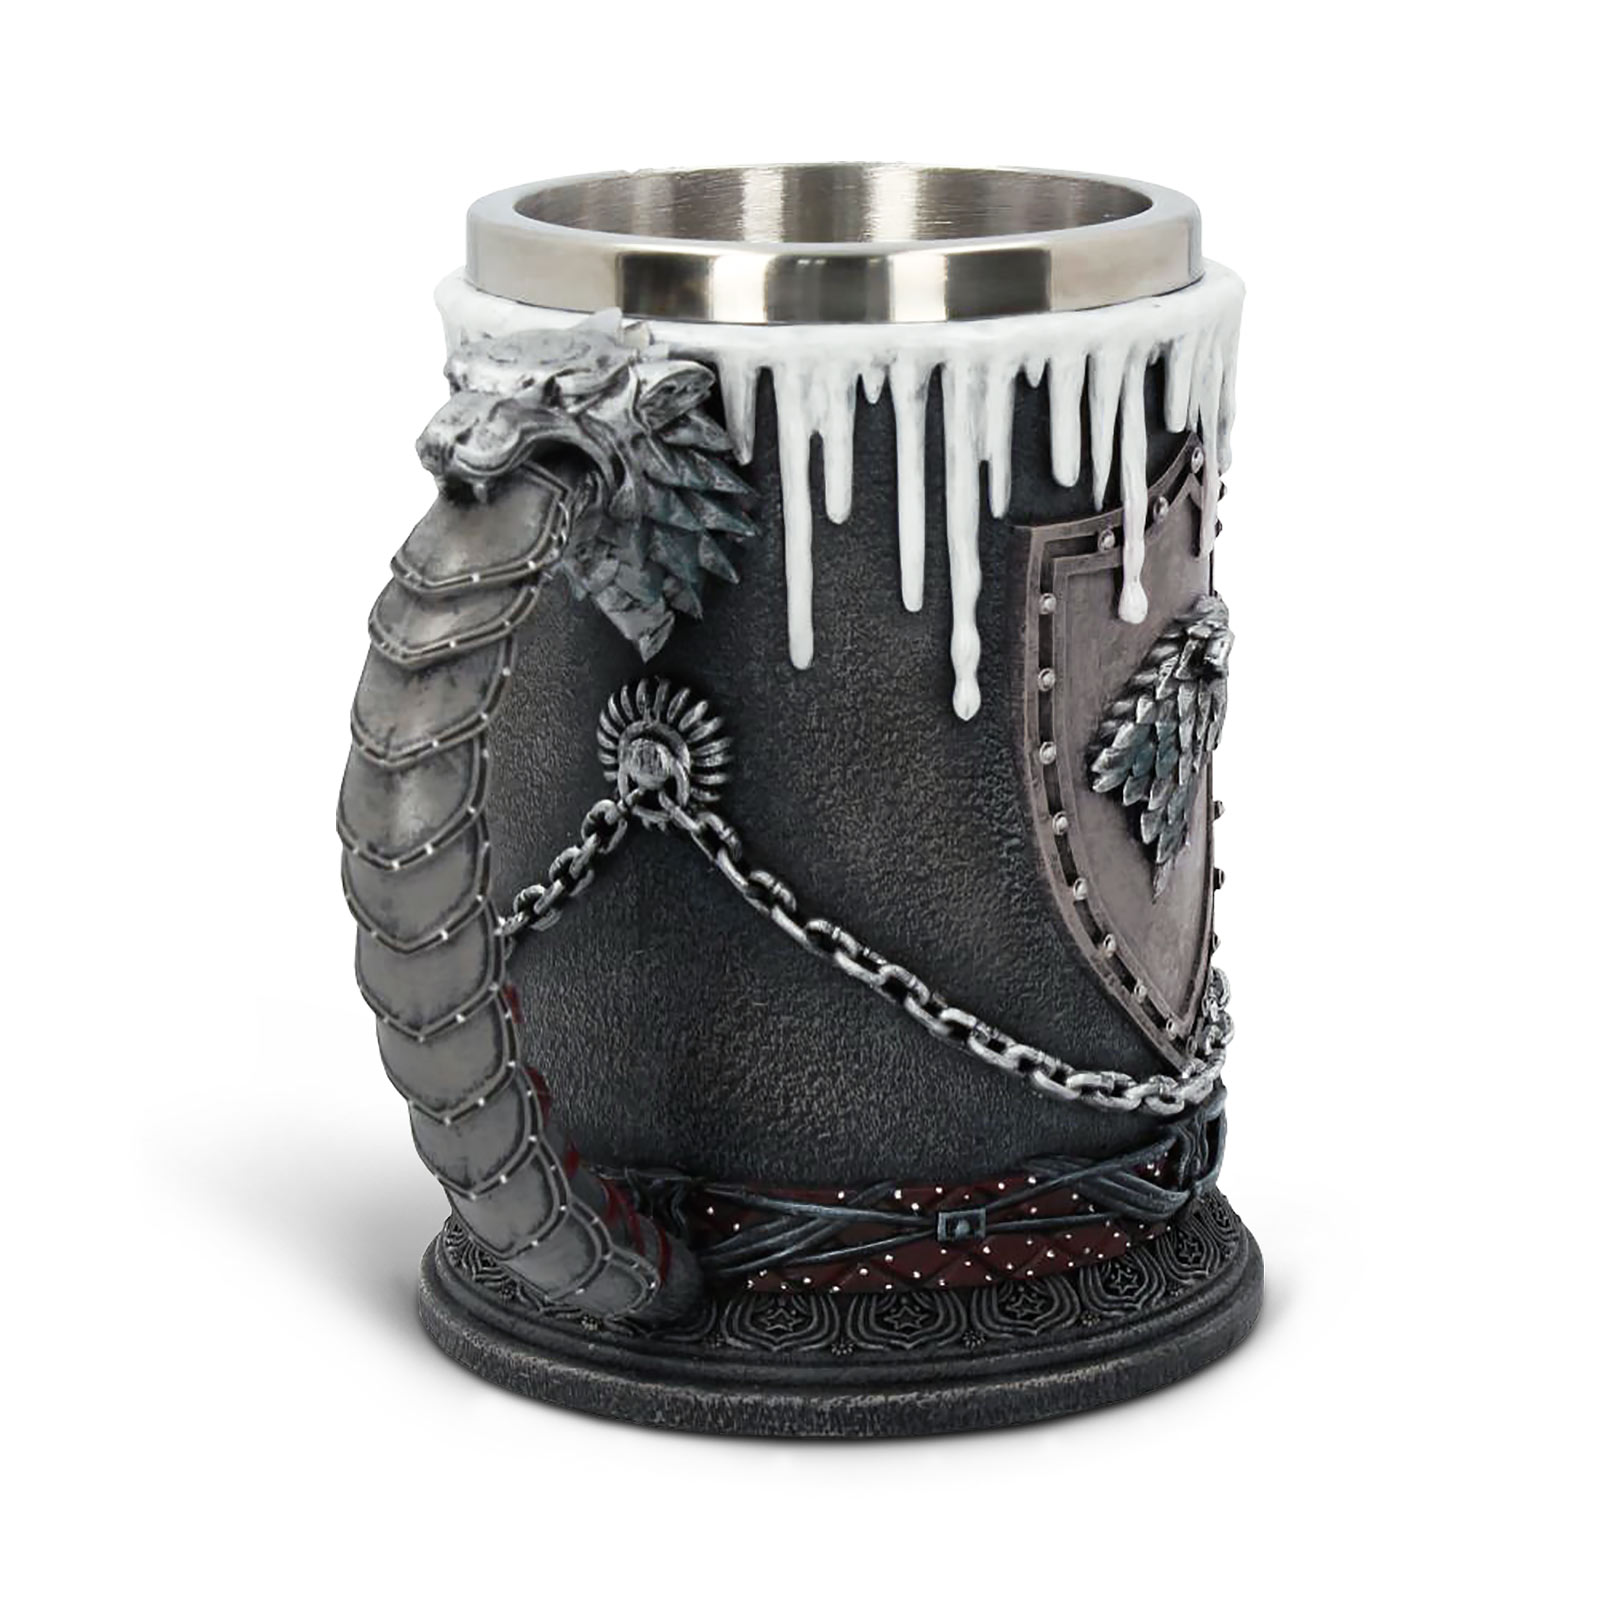 Game of Thrones - Stark Coat of Arms Deluxe Mug